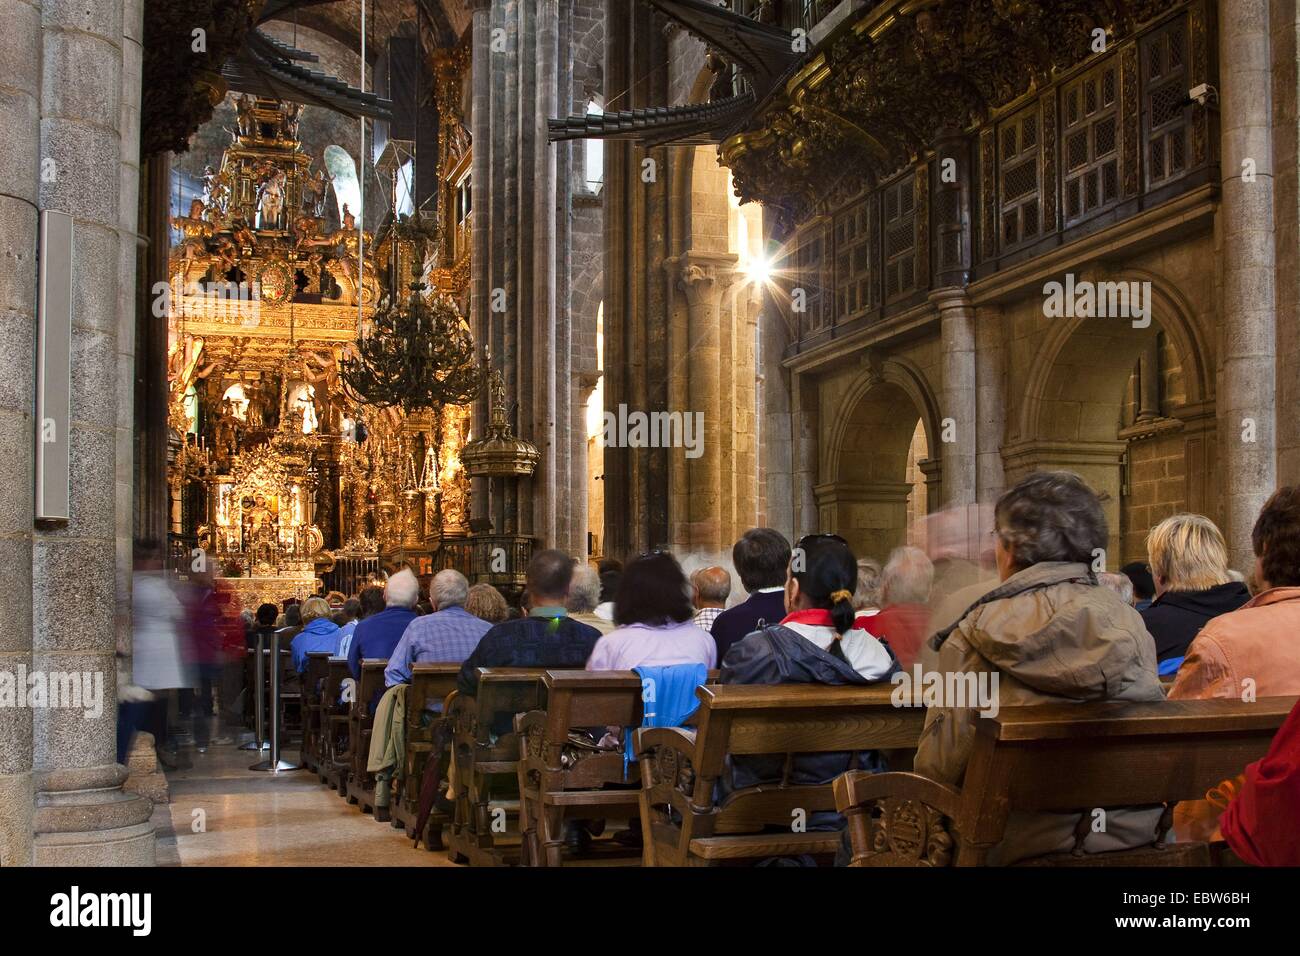 Pilgrimages High Resolution Stock Photography and Images - Alamy